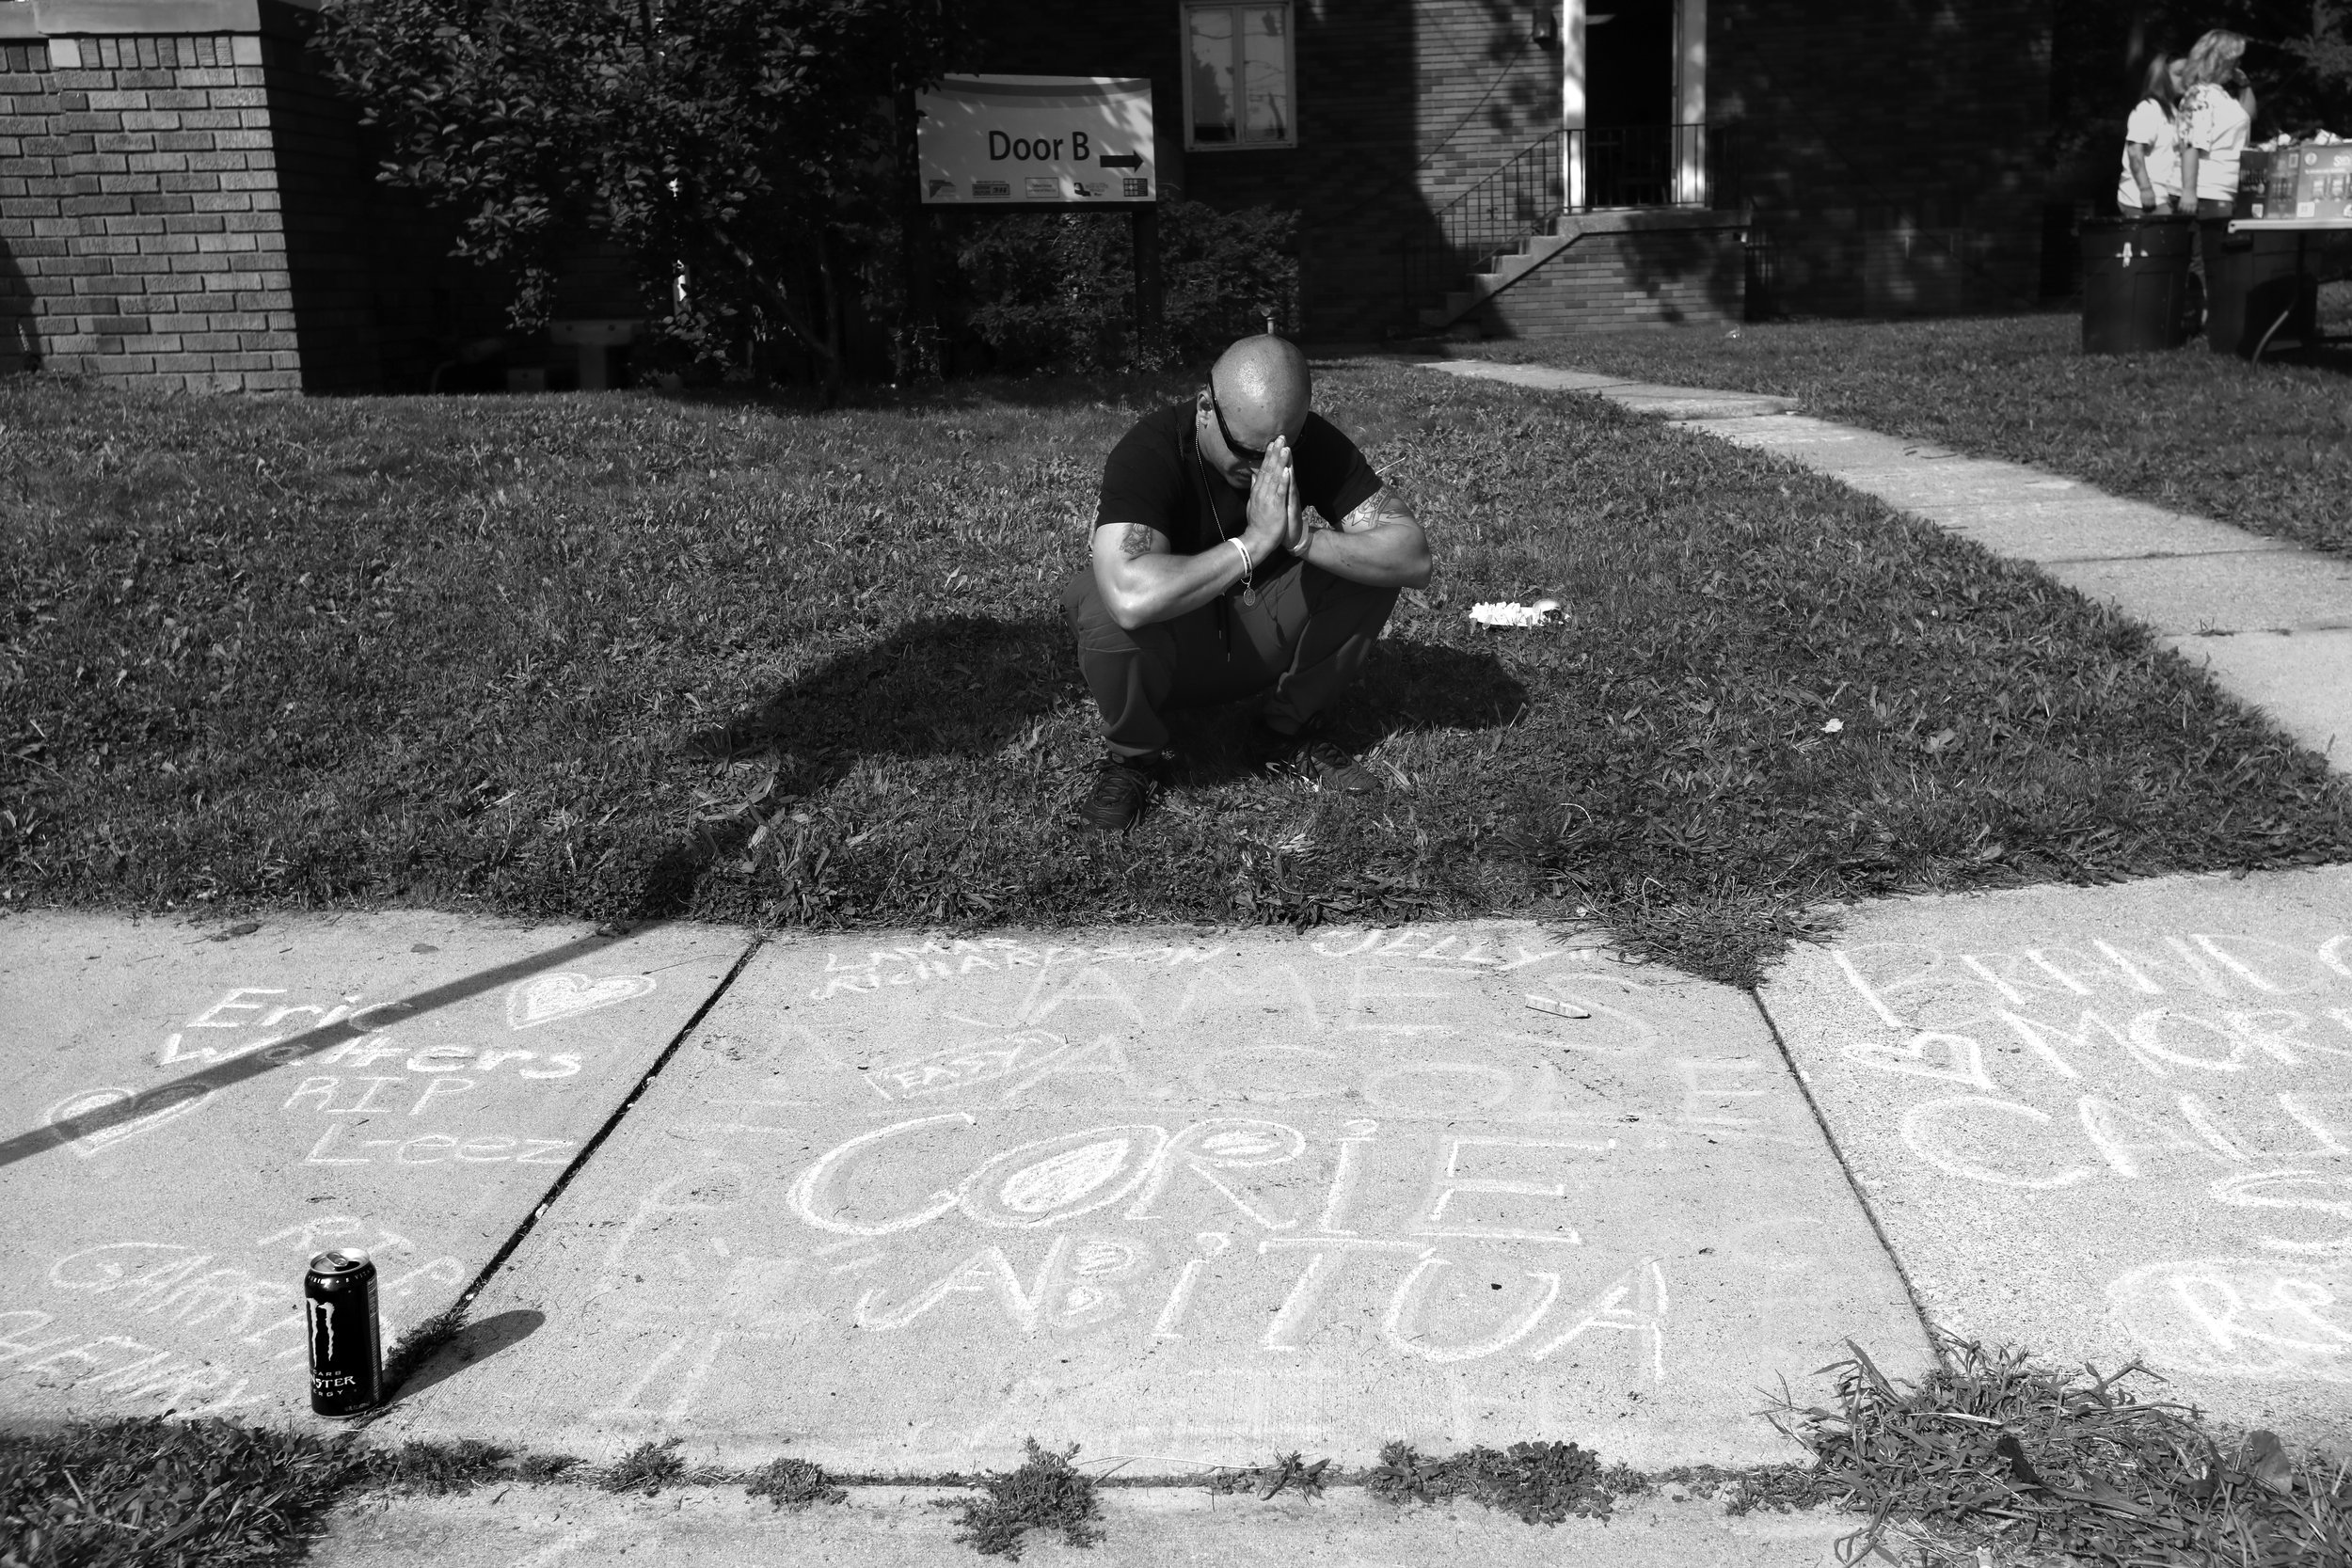  A man who agreed to be photographed prays near the chalked names of people he lost to opioid overdose during a remembrance event held at the Northwest Ohio Syringe Services, a harm reduction program that works with active drug users, in Toledo, Ohio